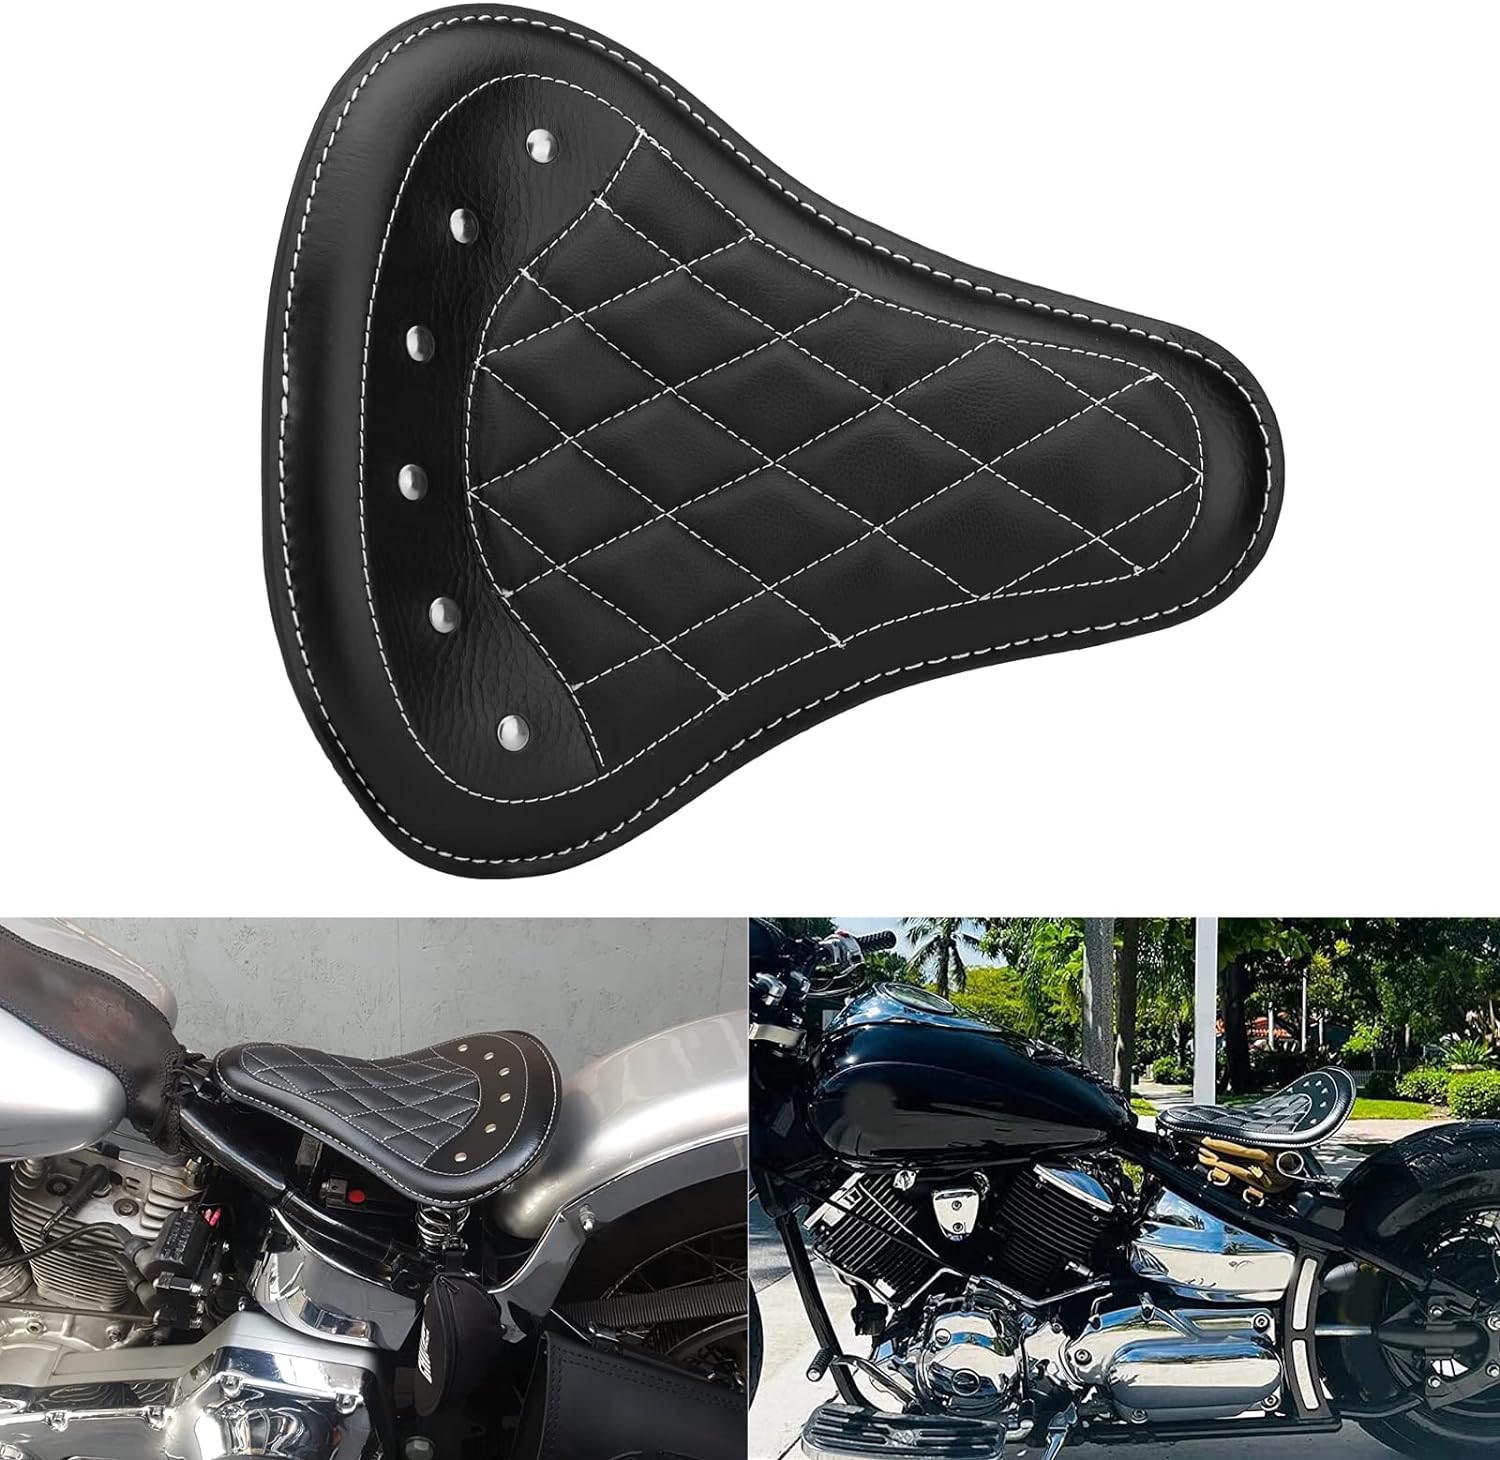 LKV Motorcycle Solo Seat with Spring Base,Black Leather Motorcycle Seat Compatible with Harley Sportster XL 883 1200 Honda Yamaha Kawasaki Suzuki Sportster Bobber Chopper - LKV Motorcycle Solo Seat Review